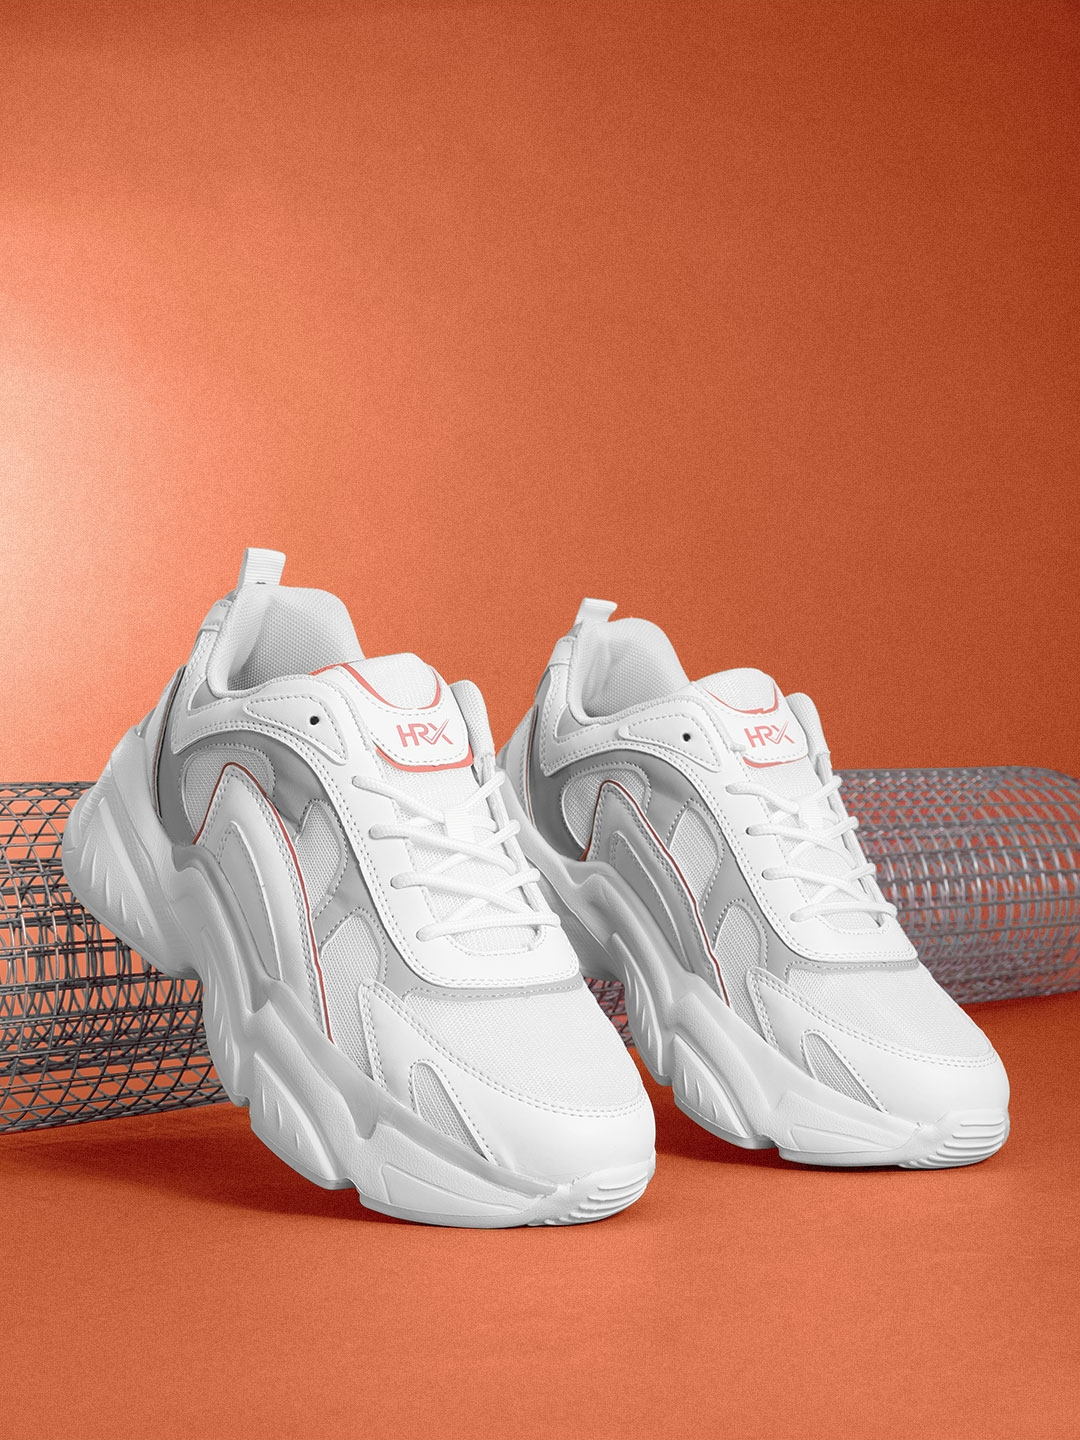 Unveil 147+ chunky sneakers latest